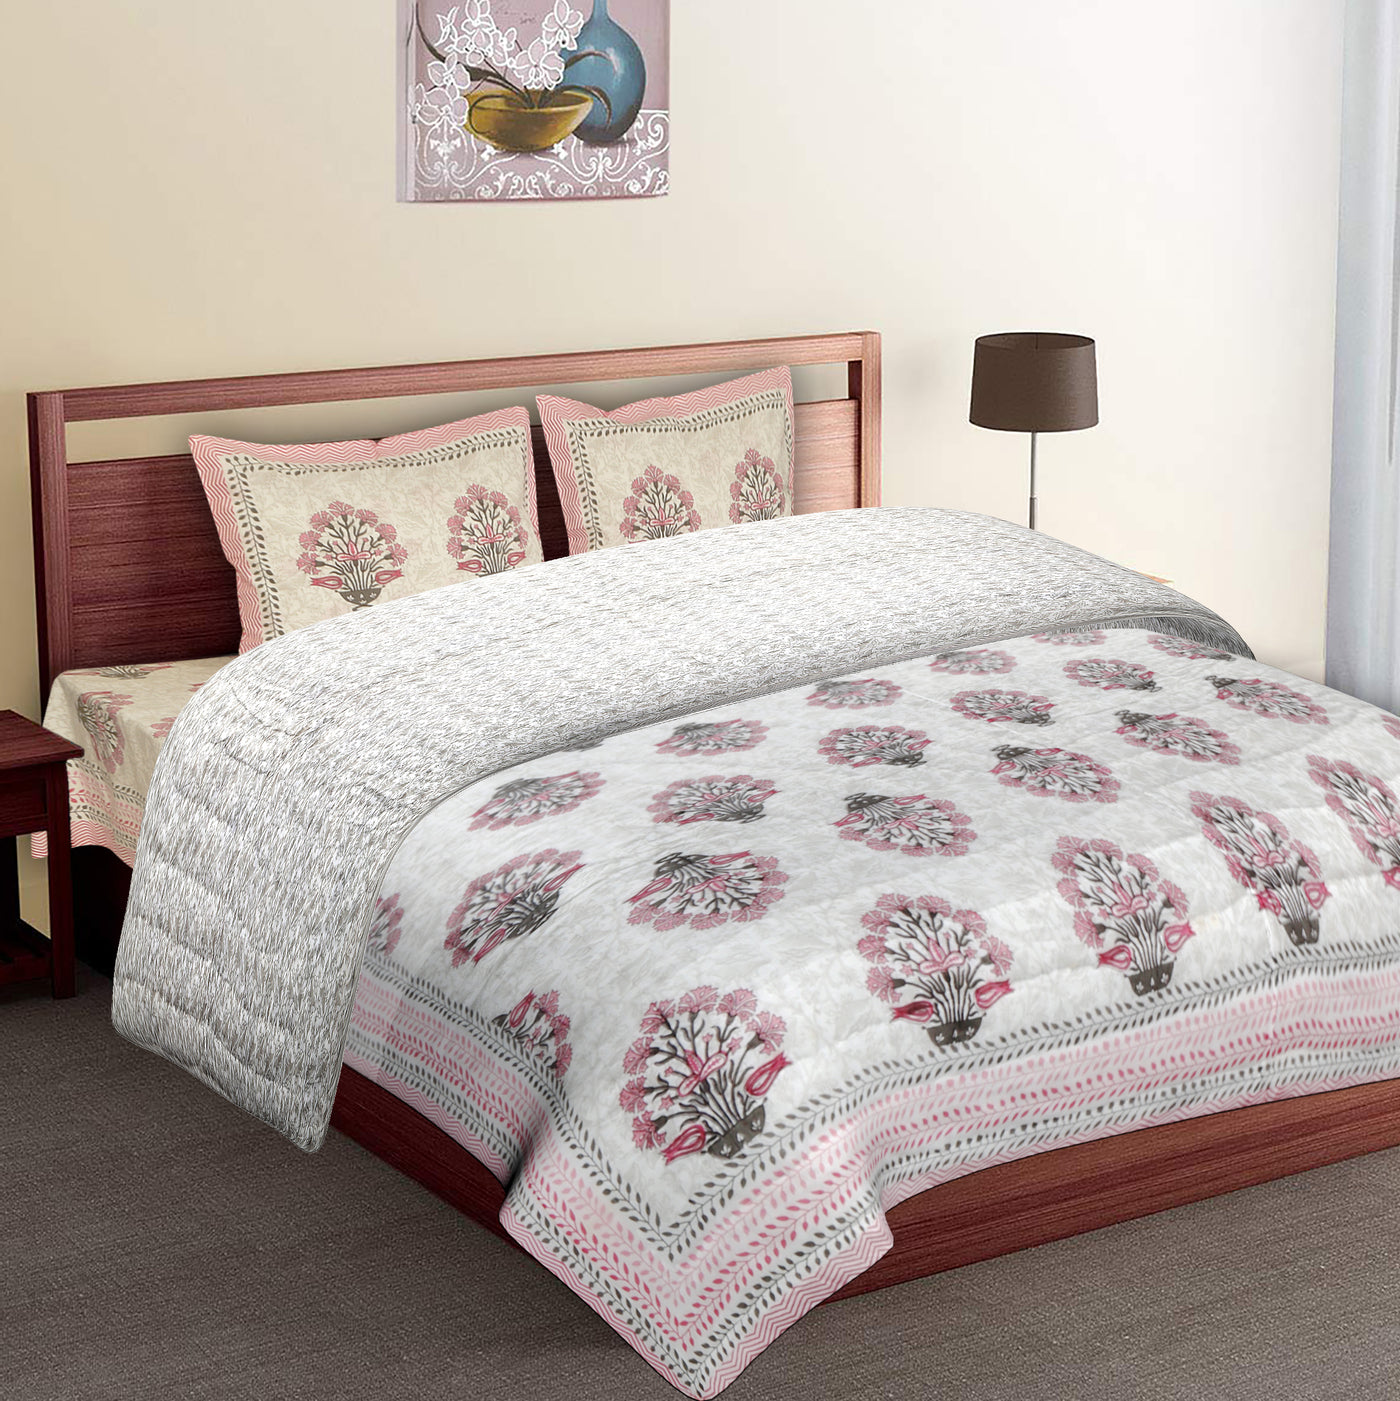 ac quilt double bed king size cotton